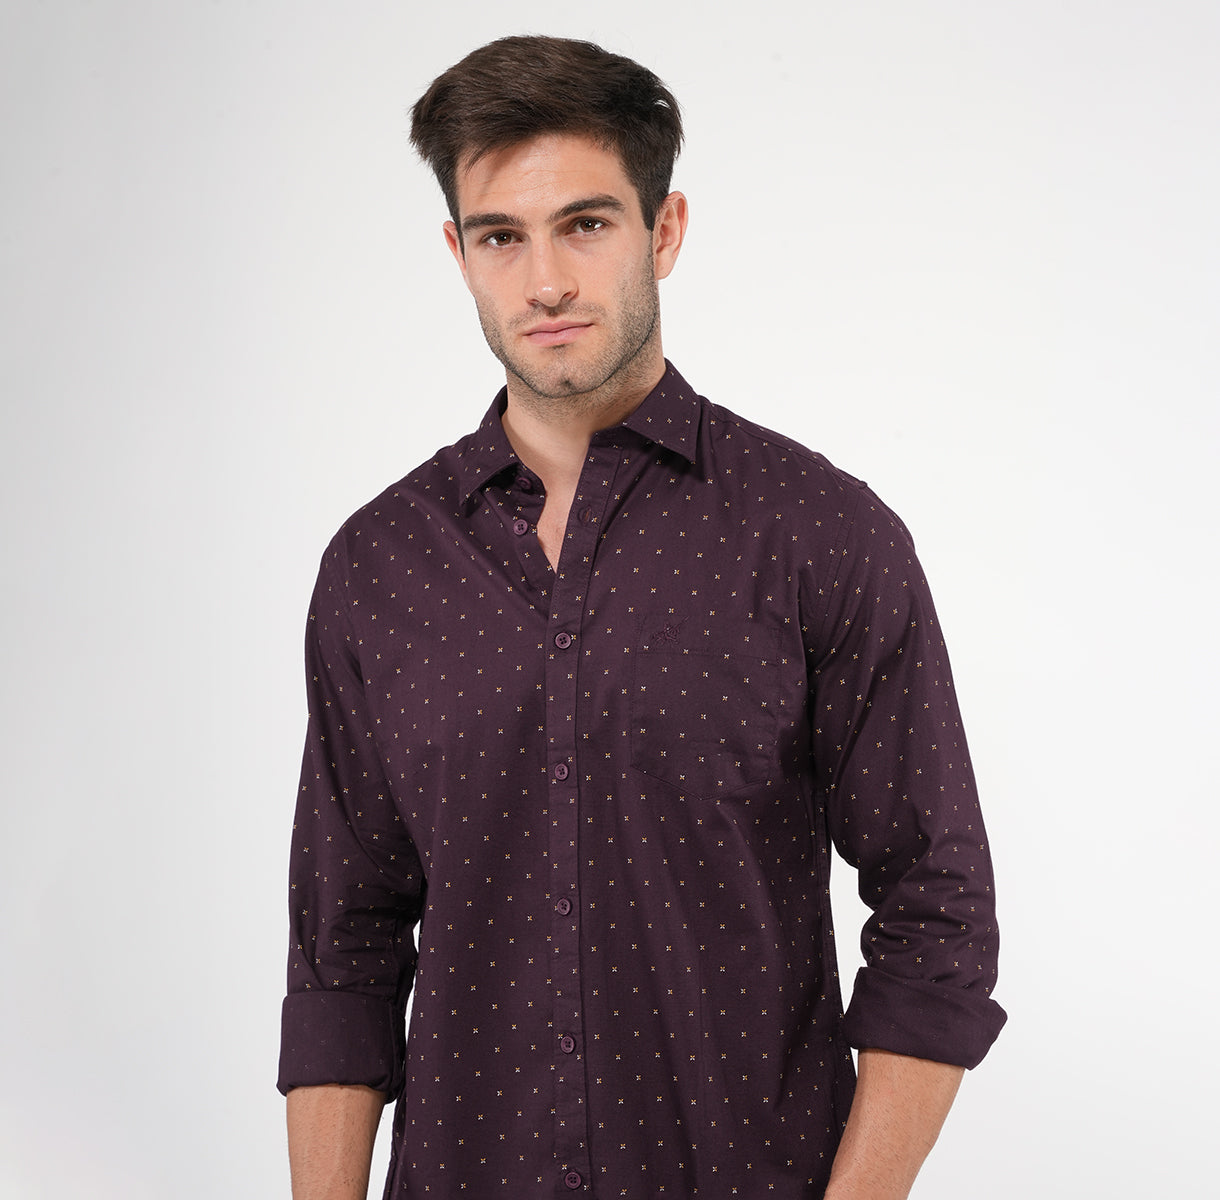 AOP FULL SLEEVES CASUAL COTTON SHIRT